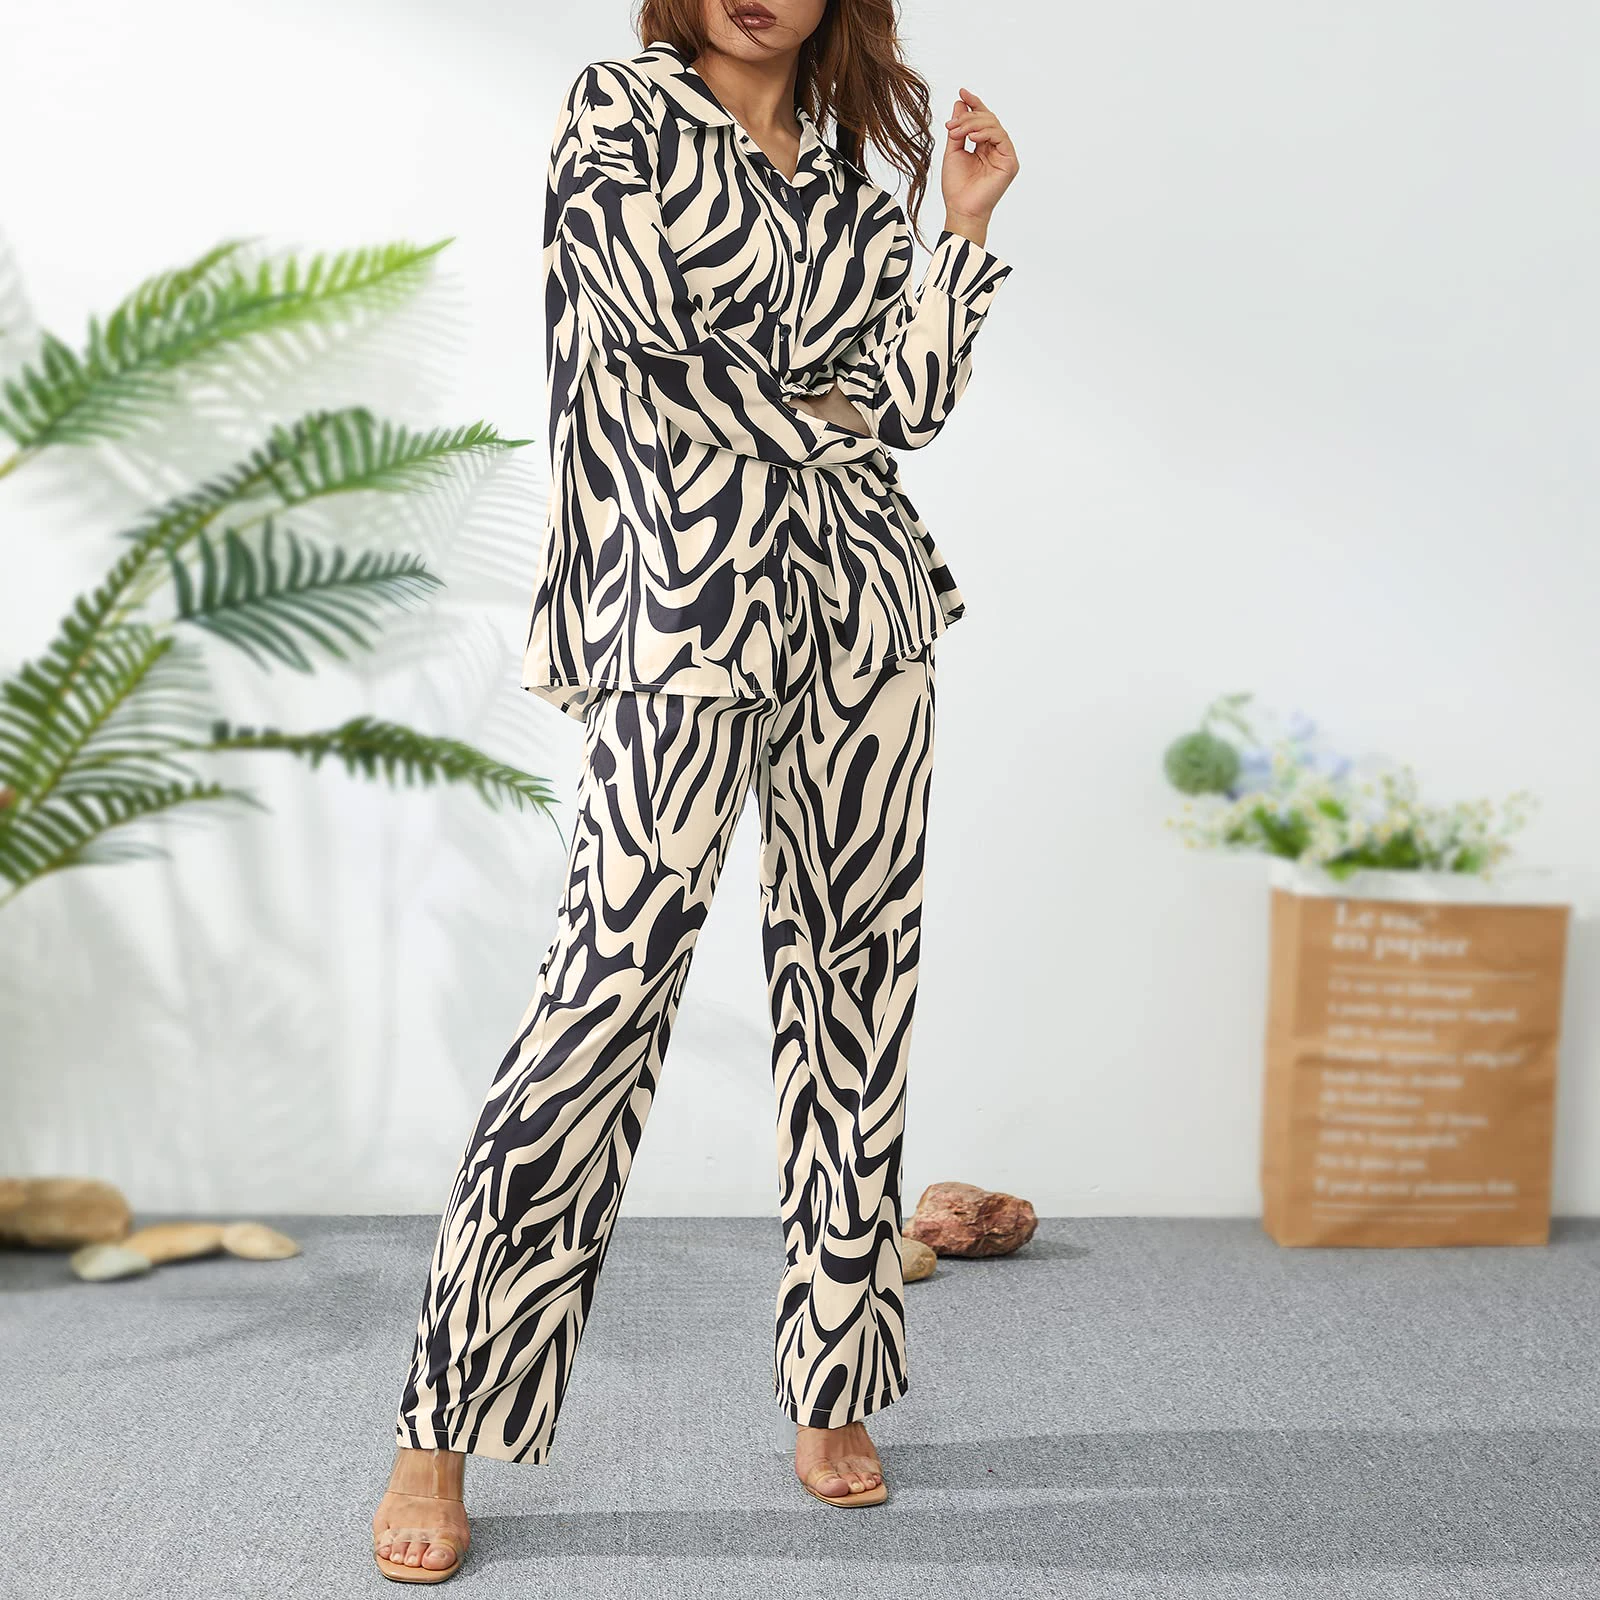 Women Lapel Shirt + Wide Leg Pants Casual Blouse Top Trousers Set Two Piece Suit Single Breasted Fashion Zebra Printed Outfit 2